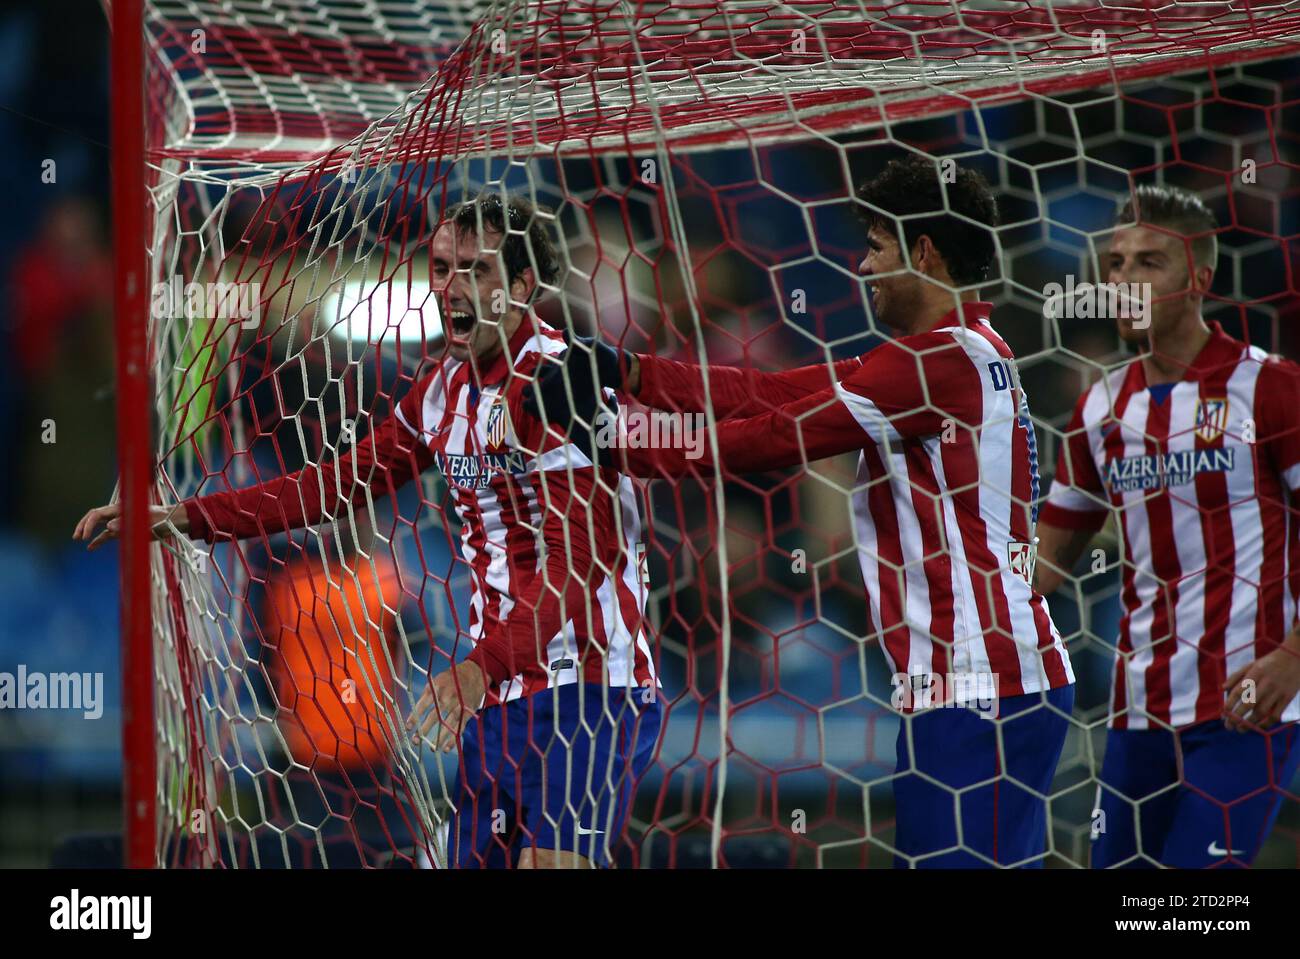 MADRID. January 23, 2014. Diego Godin scores and celebrates the goal during the Copa del Rey match between Atletico de Madrid and Athletic Bilbao at the Vicente Calderon stadium. Image Oscar del Pozo ARCHDCGodín, scorer of Atlético's goal, is congratulated by Diego Costa and Alderweireld. Credit: Album / Archivo ABC / Oscar del Pozo Stock Photo